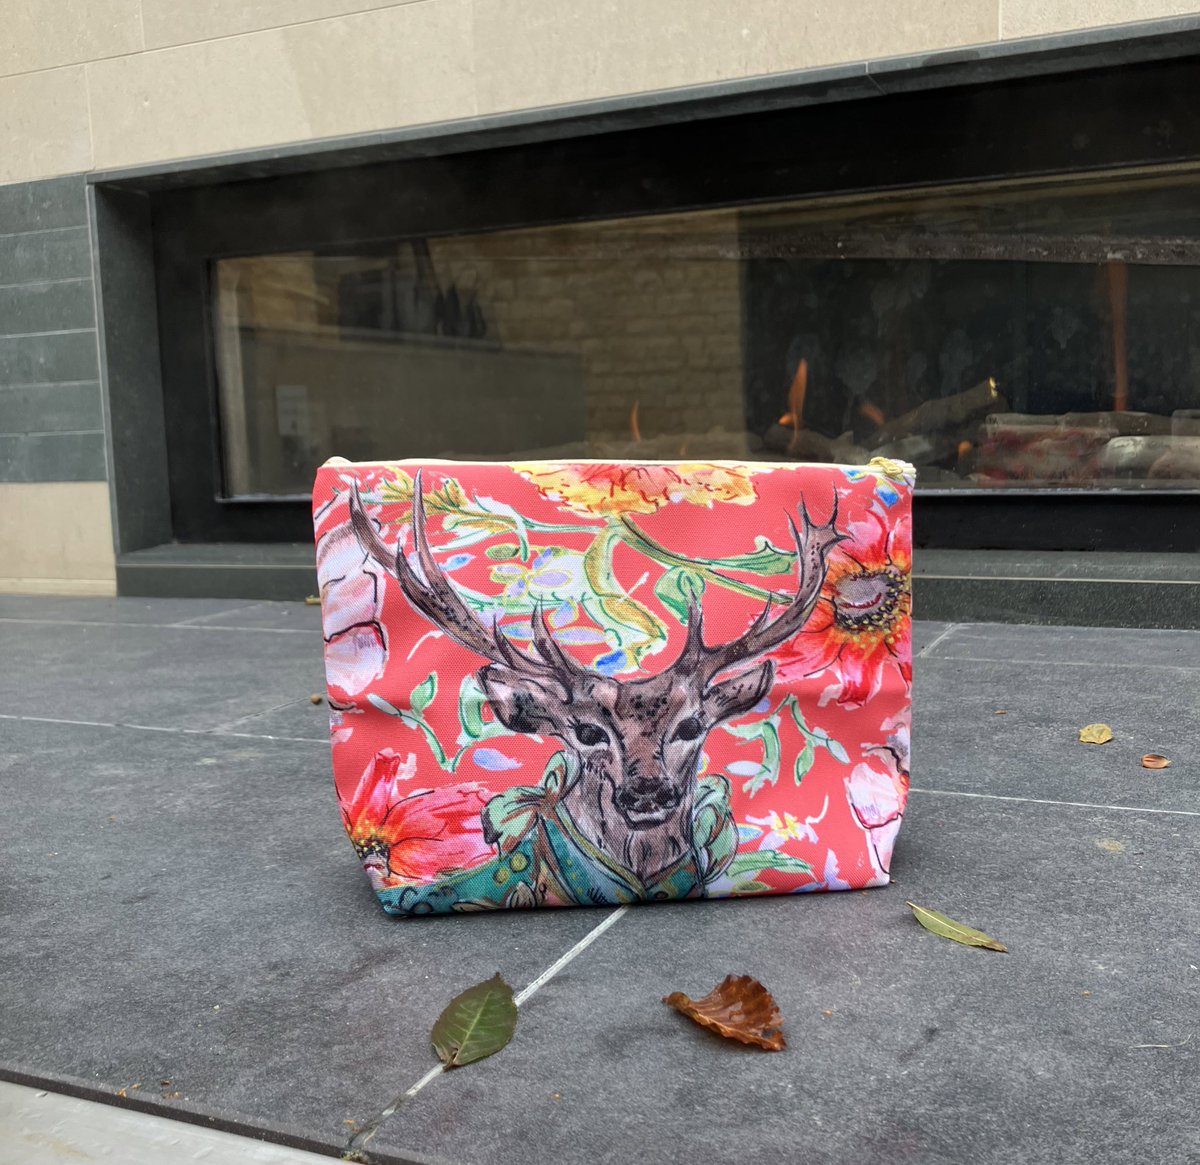 Autumn 🍂🦌 claire-louise.co.uk/product/cottag…
#autumn #toiletrybag #gifting #stag #travelaccessories